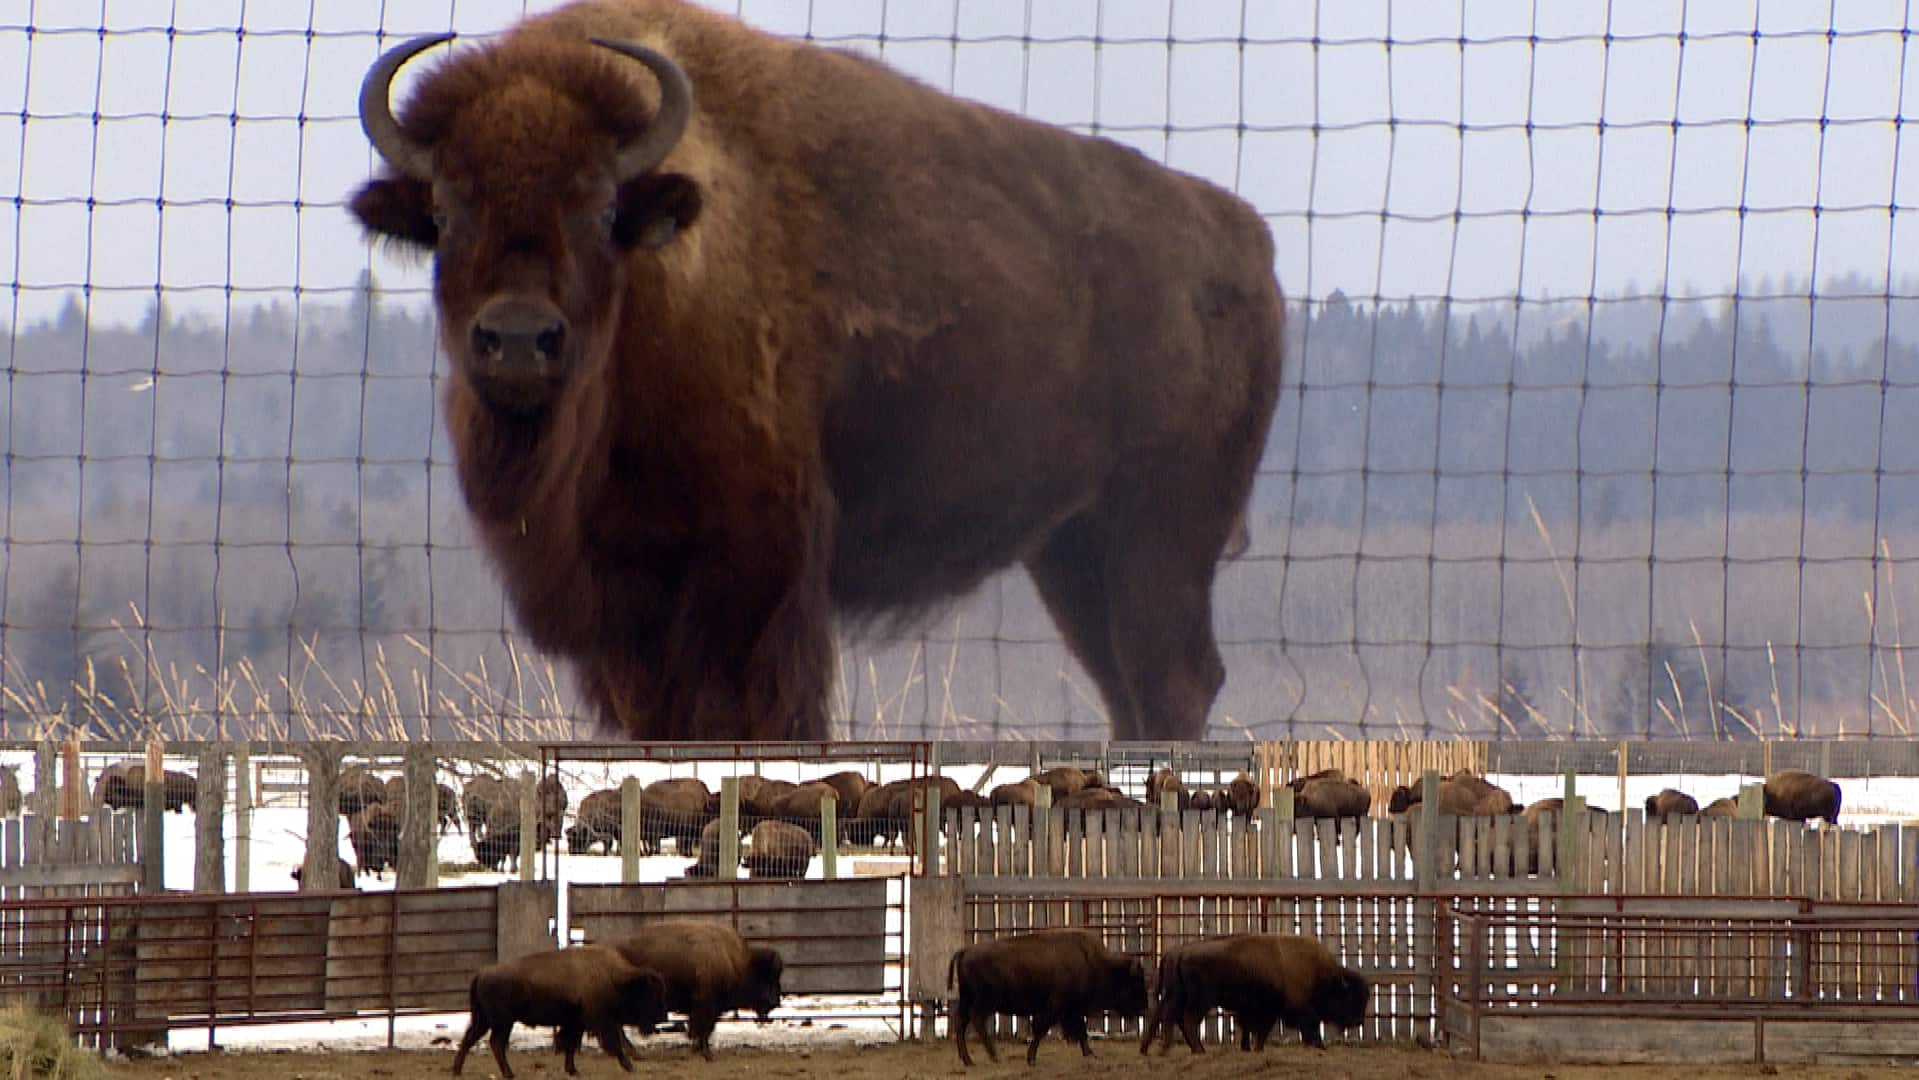 Indigenous-led bison repopulation projects are helping the animal thrive again in Alberta